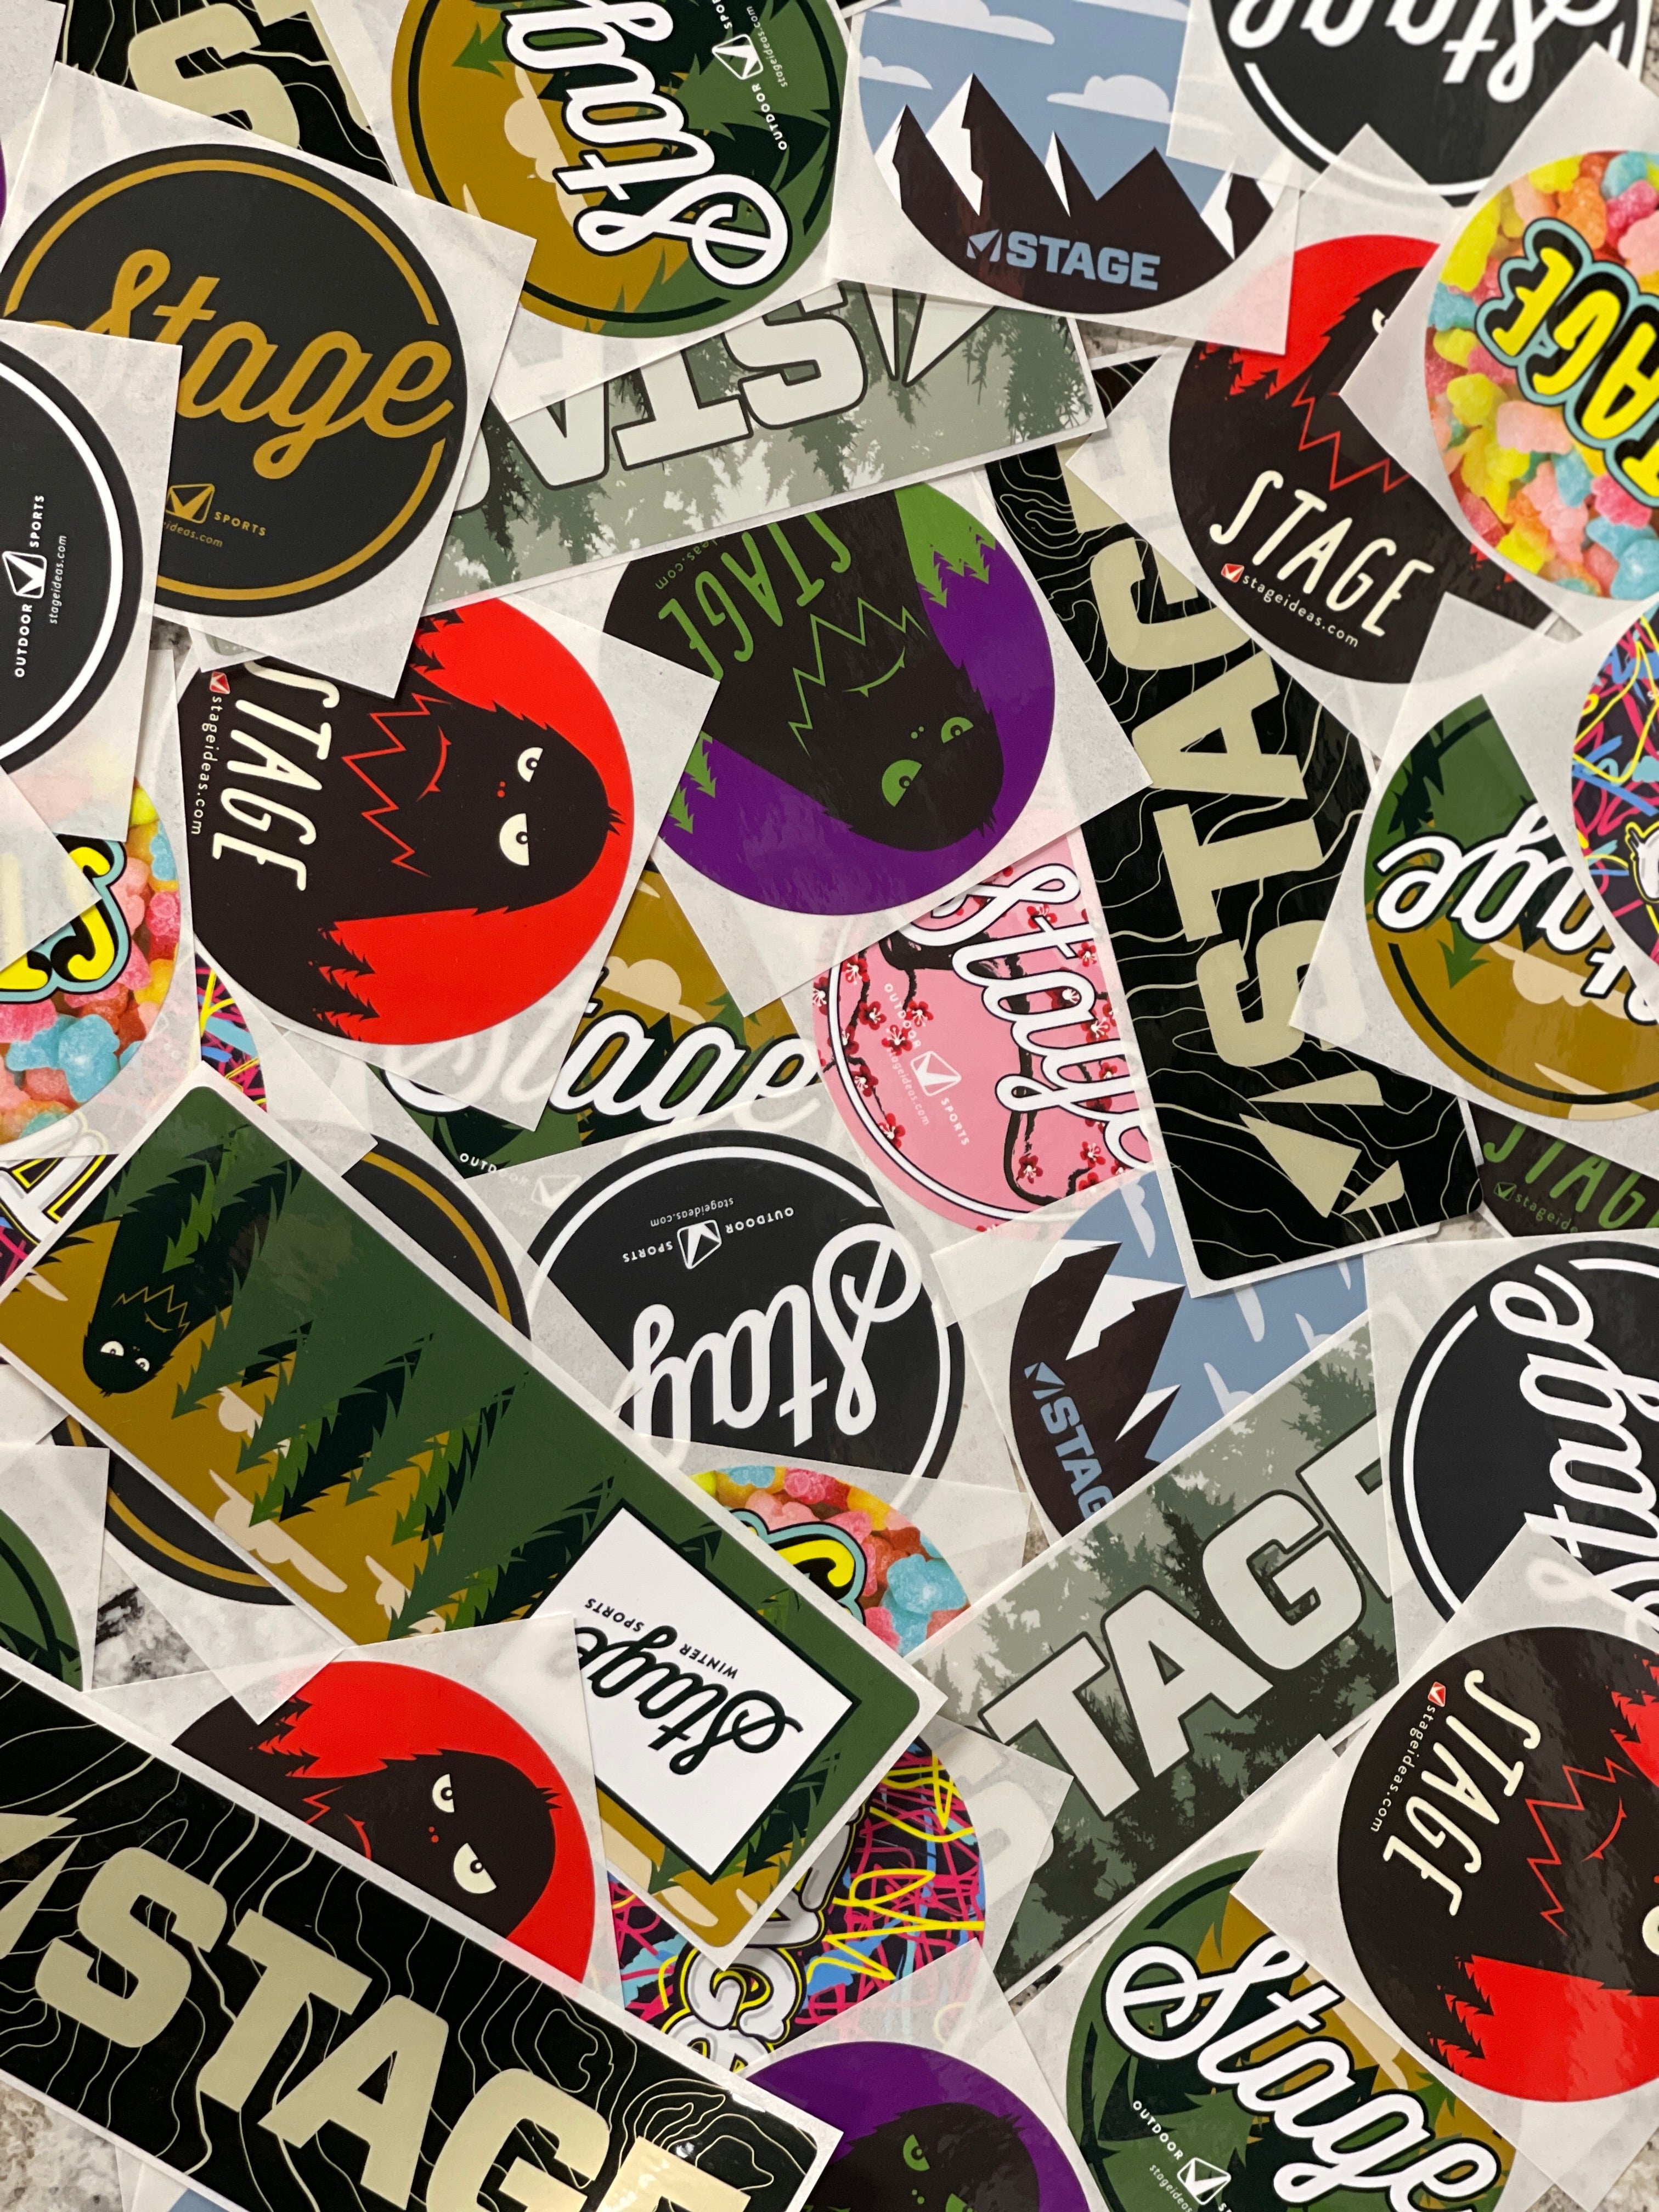 A pile of a variety of stickers featuring the STAGE Ski Goggle brand logo and promotion for custom ski goggles.